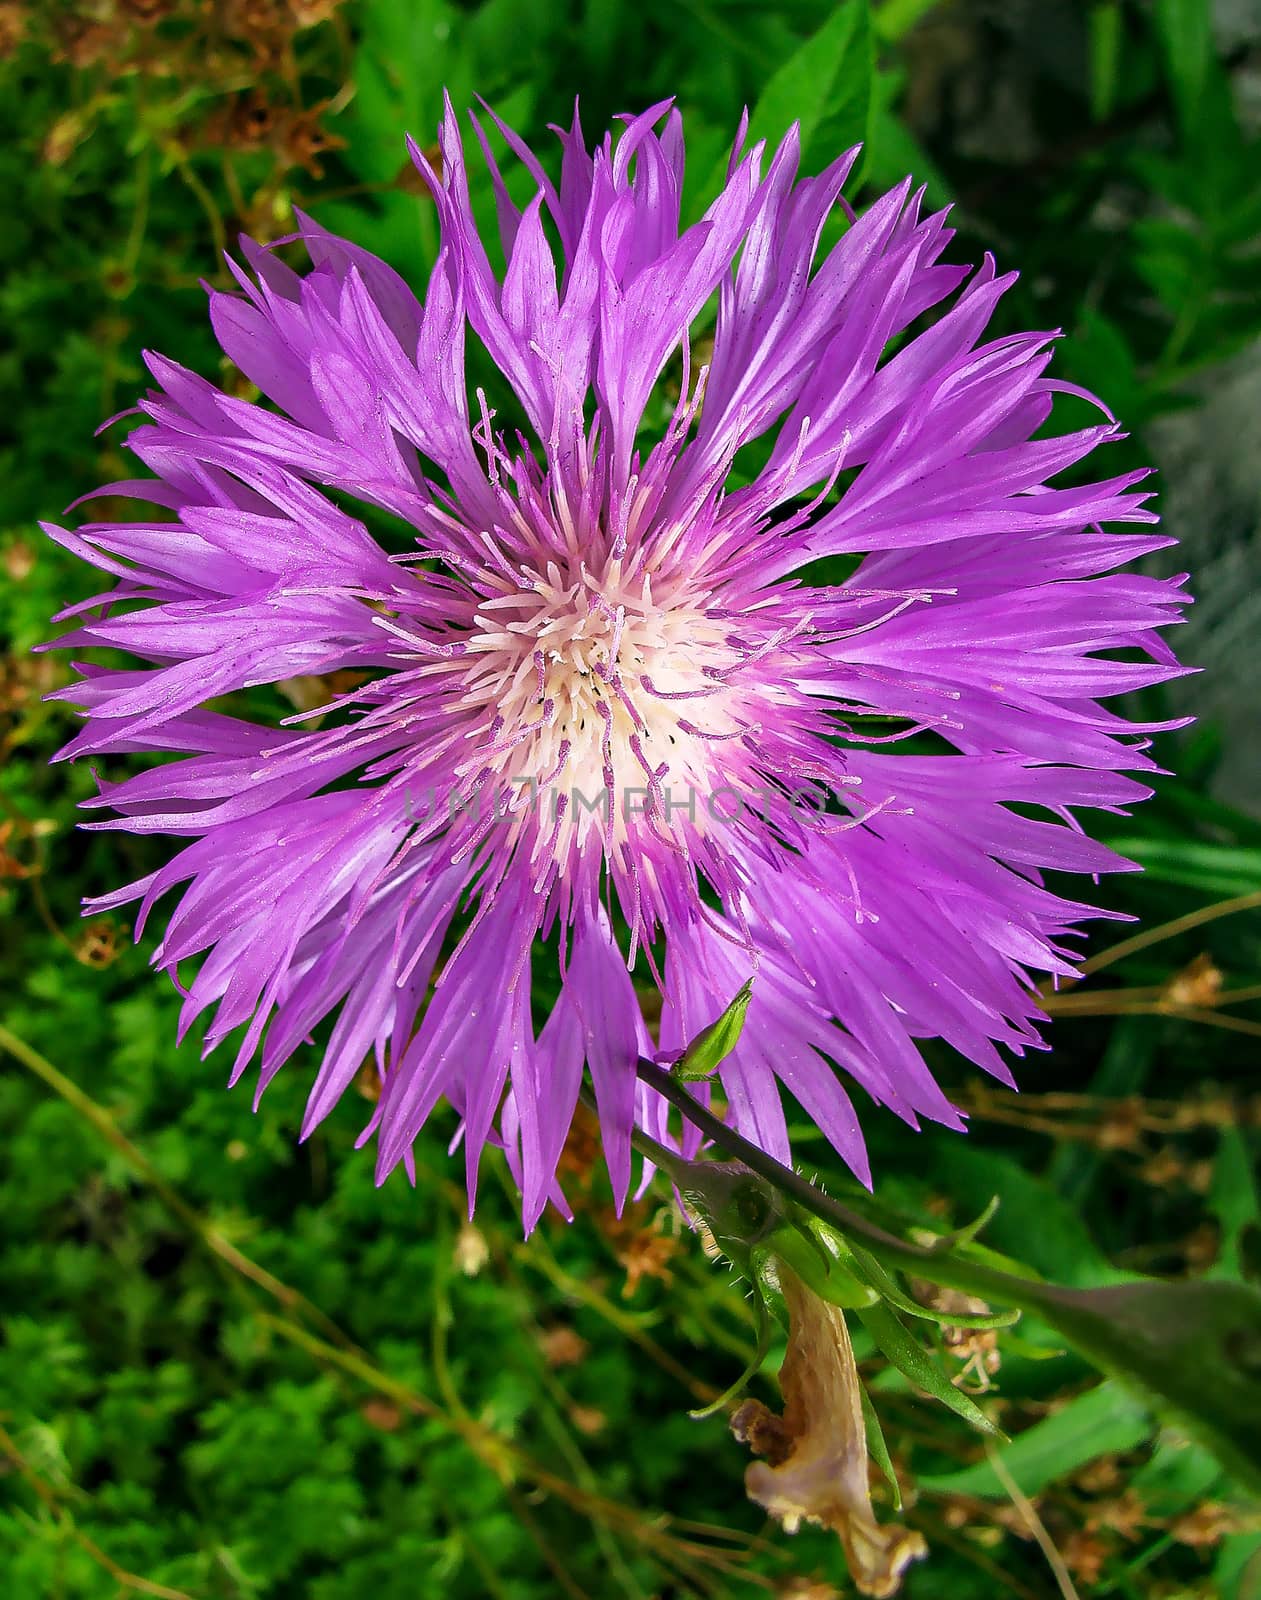 Herb of the family Asteraceae - Centaurea by Grommik